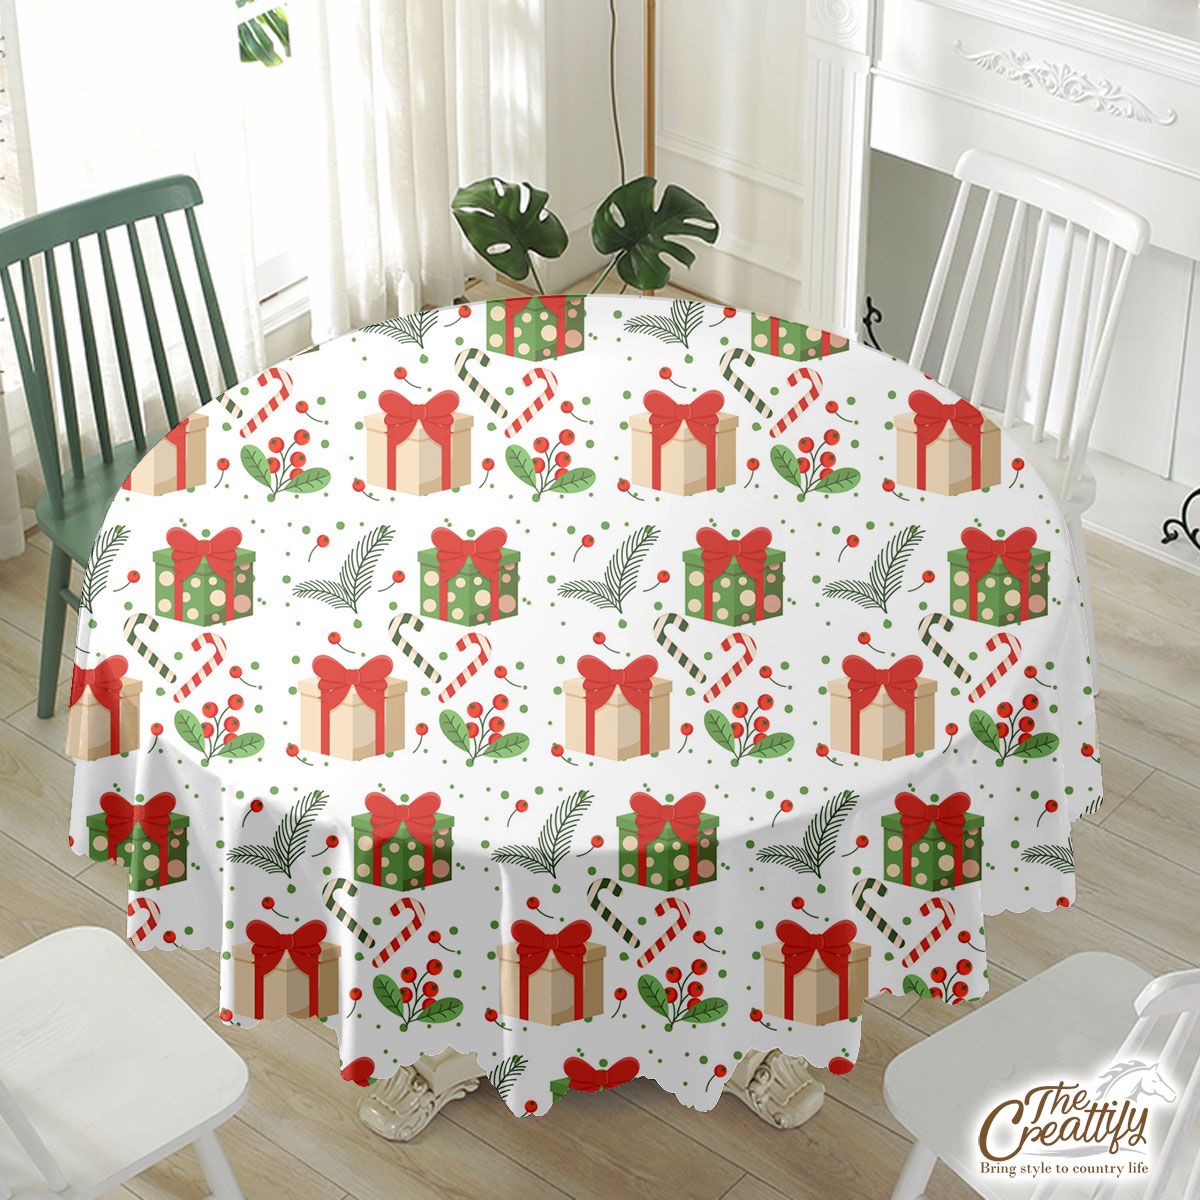 Christmas Gifts And Red Berries Waterproof Tablecloth